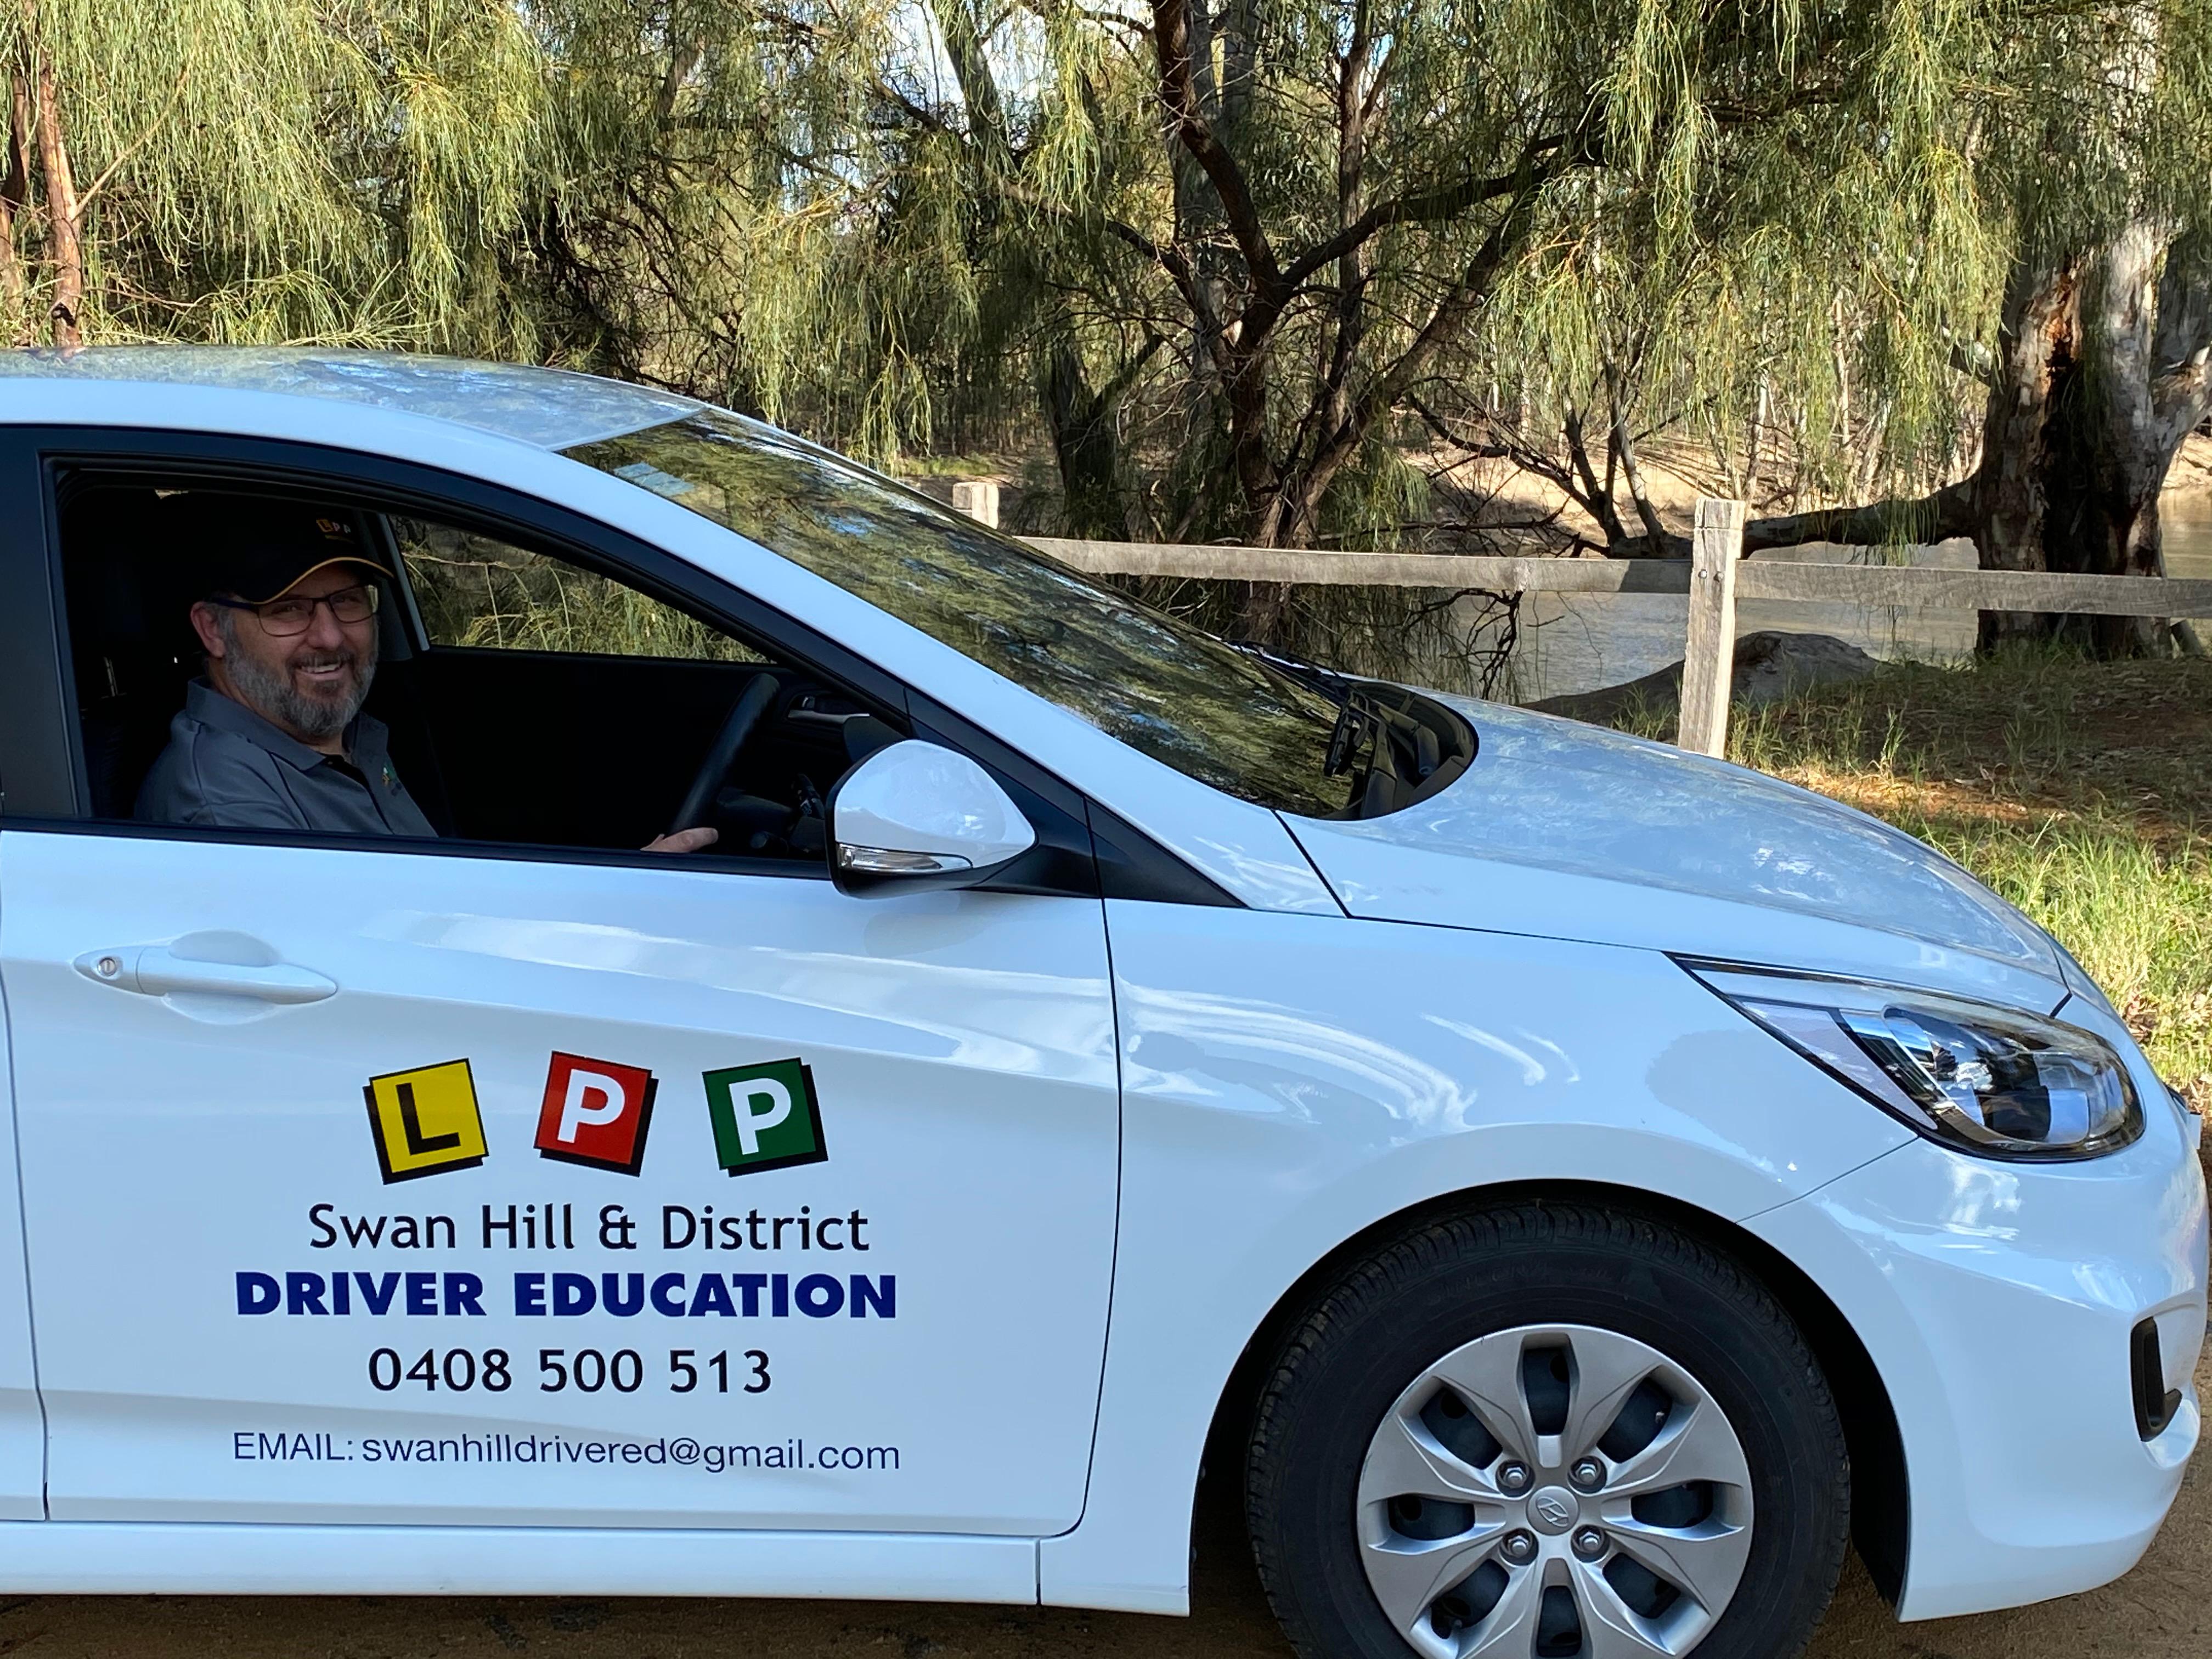 Swan Hill and District Driver Education - Swan Hill, VIC - 0408 500 513 | ShowMeLocal.com